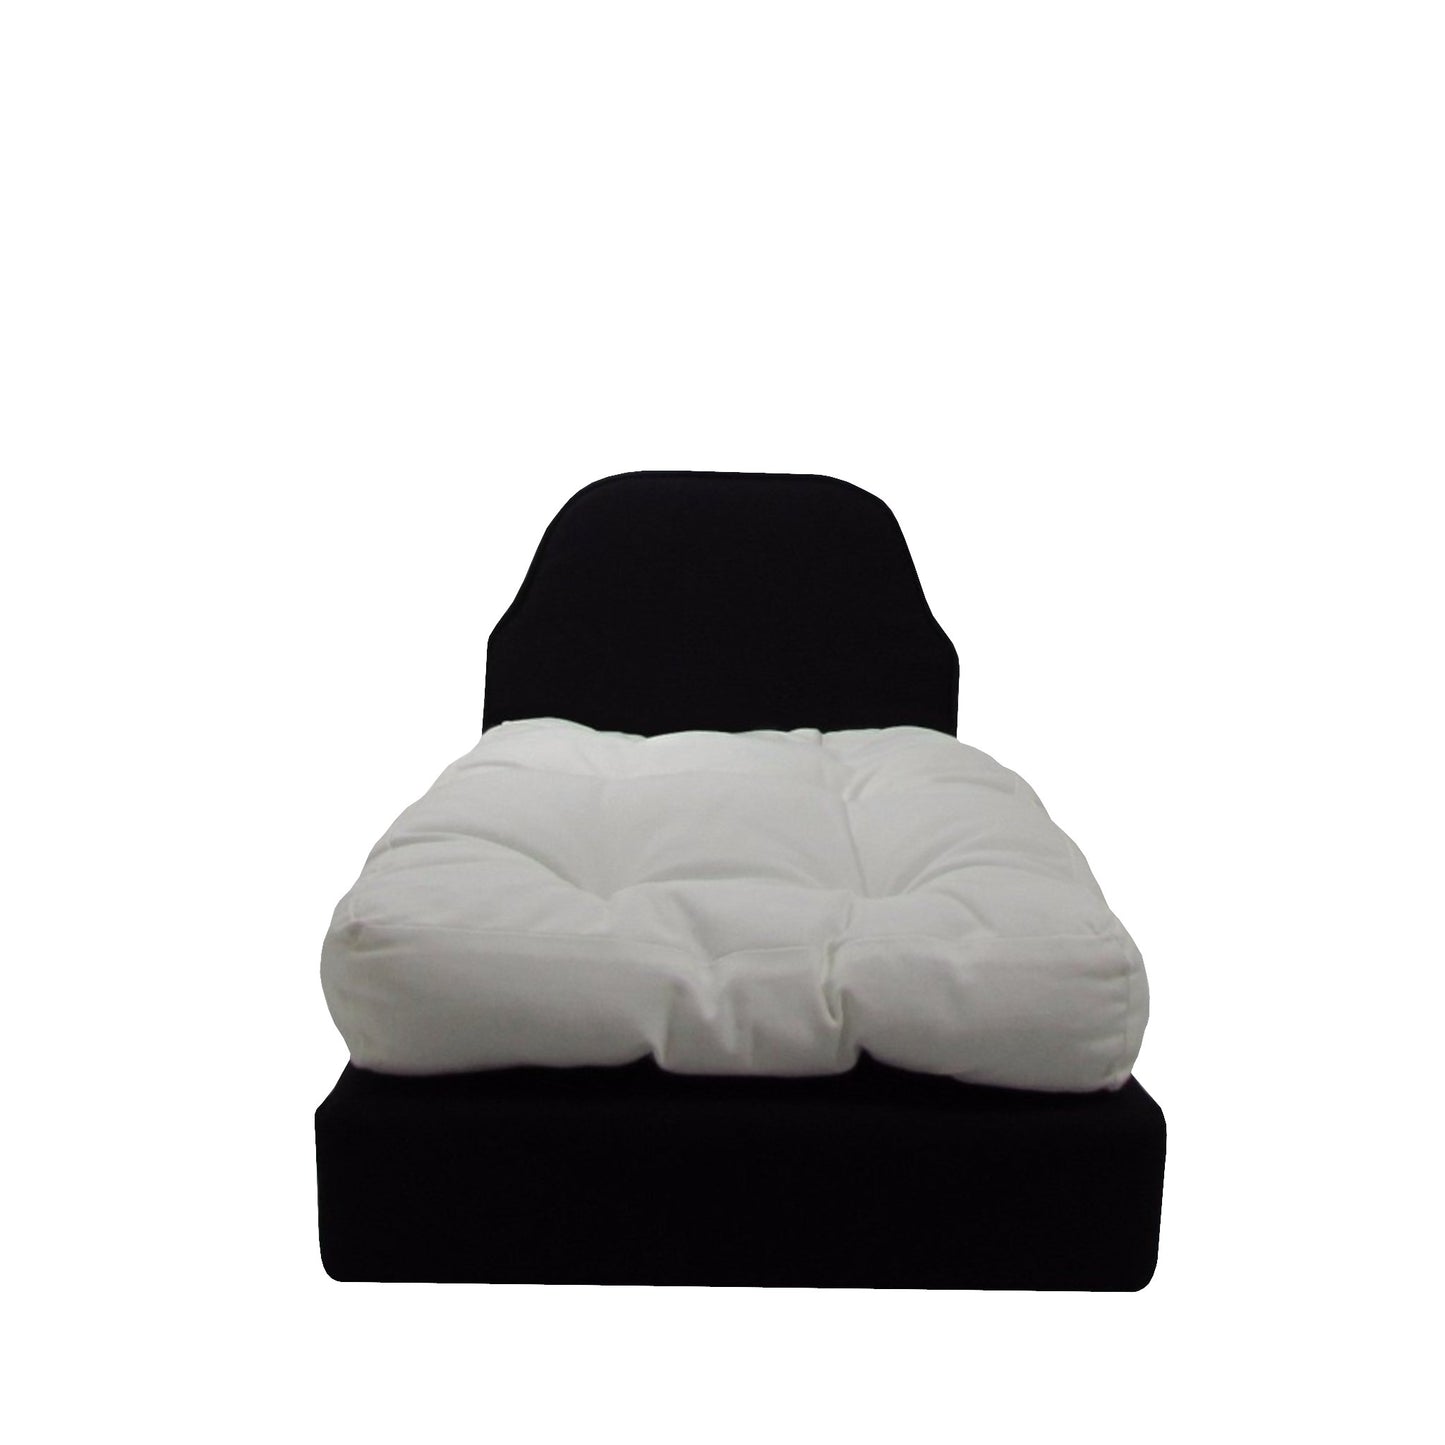 Upholstered Black Doll Bed for 18-inch dolls Second view